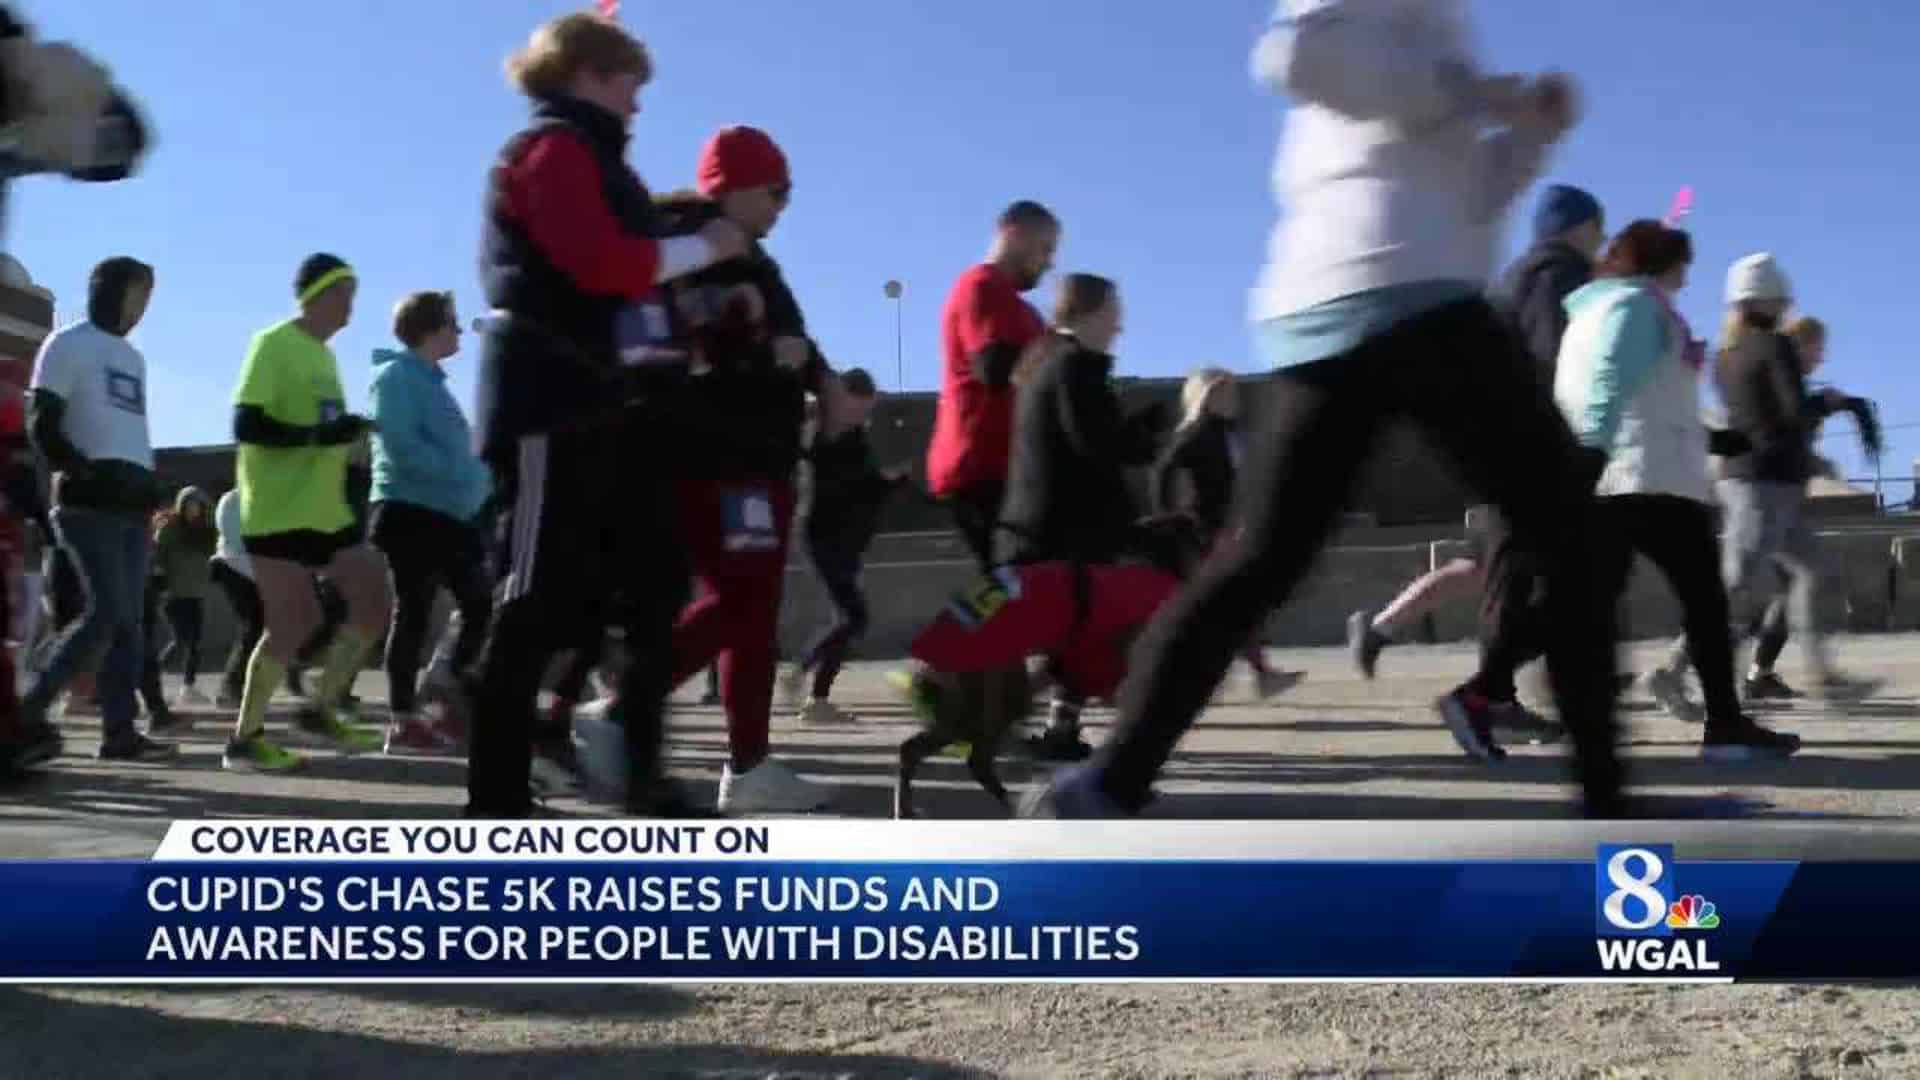 Cupid Chase 5K fundraiser for those with disabilities - msn.com